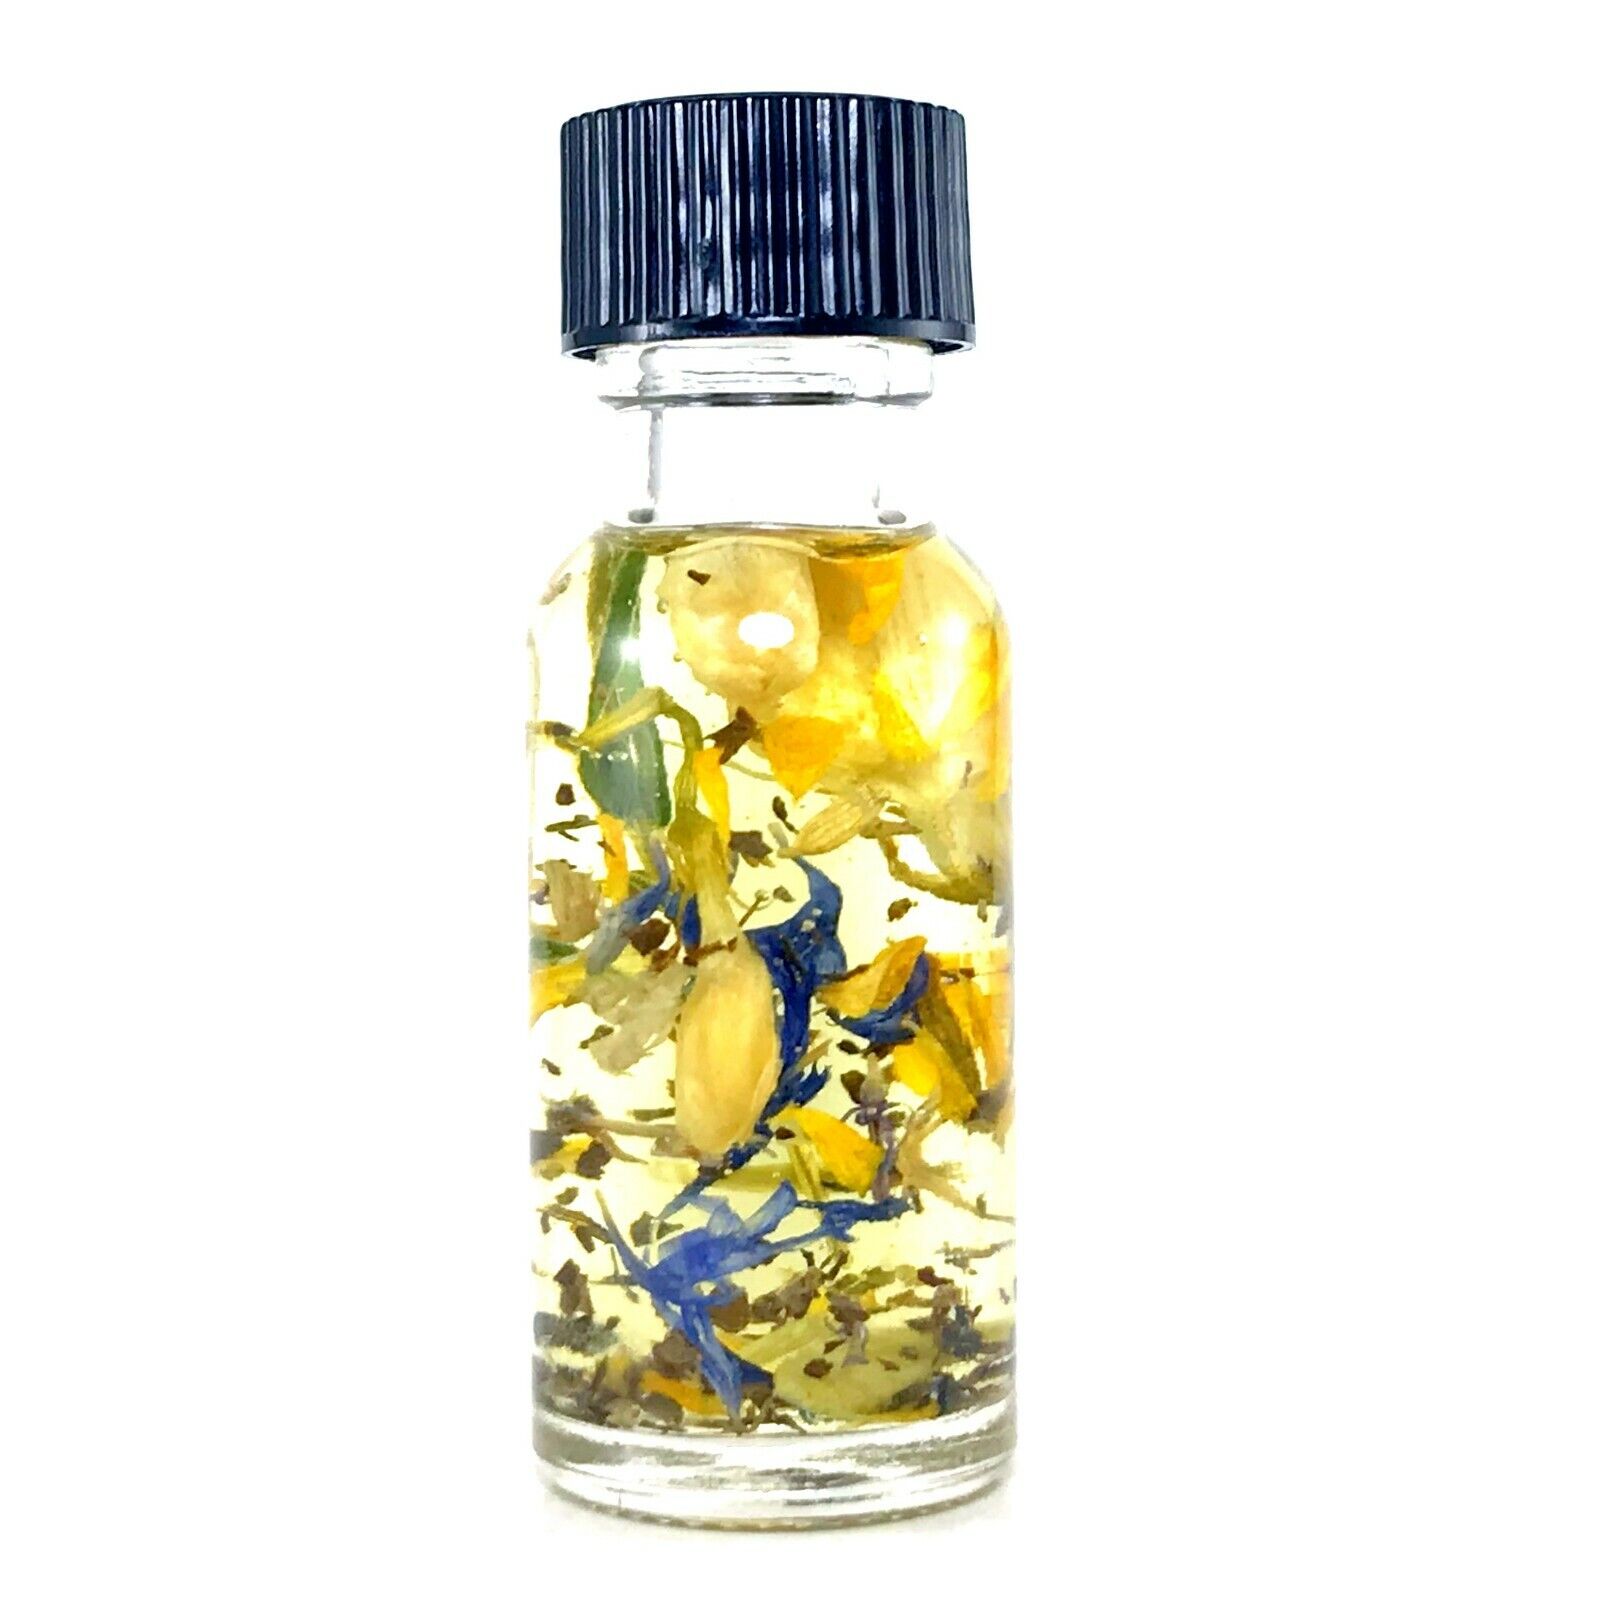 FOCUS & INSPIRATION OIL, Creativity Clear Thinking Hoodoo, Pagan FROM TWICHERY